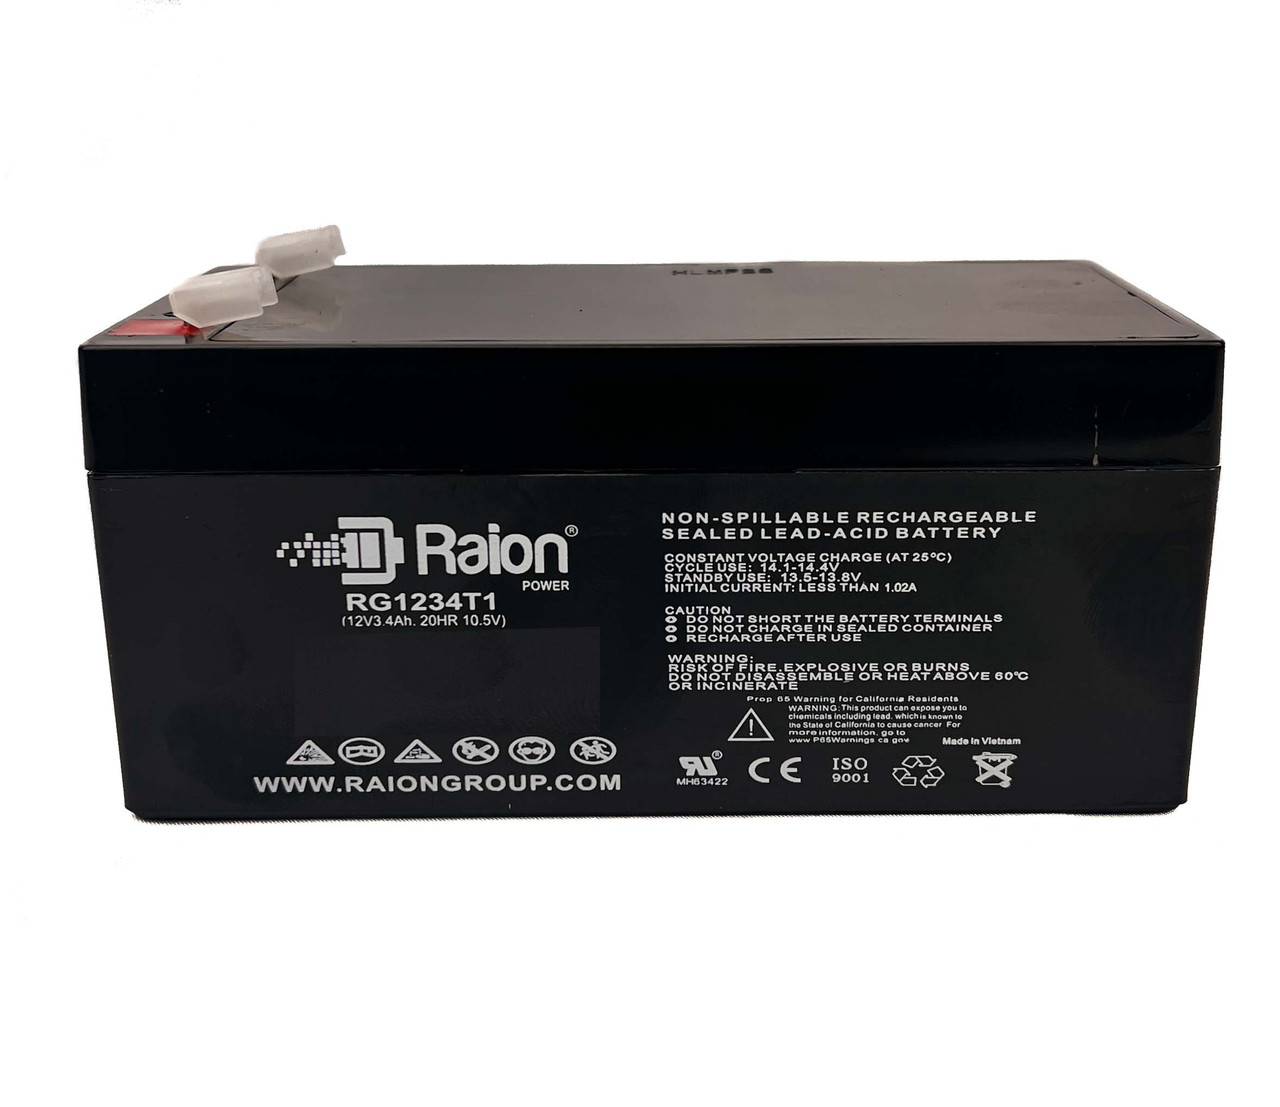 Raion Power RG1234T1 Rechargeable Compatible Replacement Battery for Wing ES 3.2-12vds